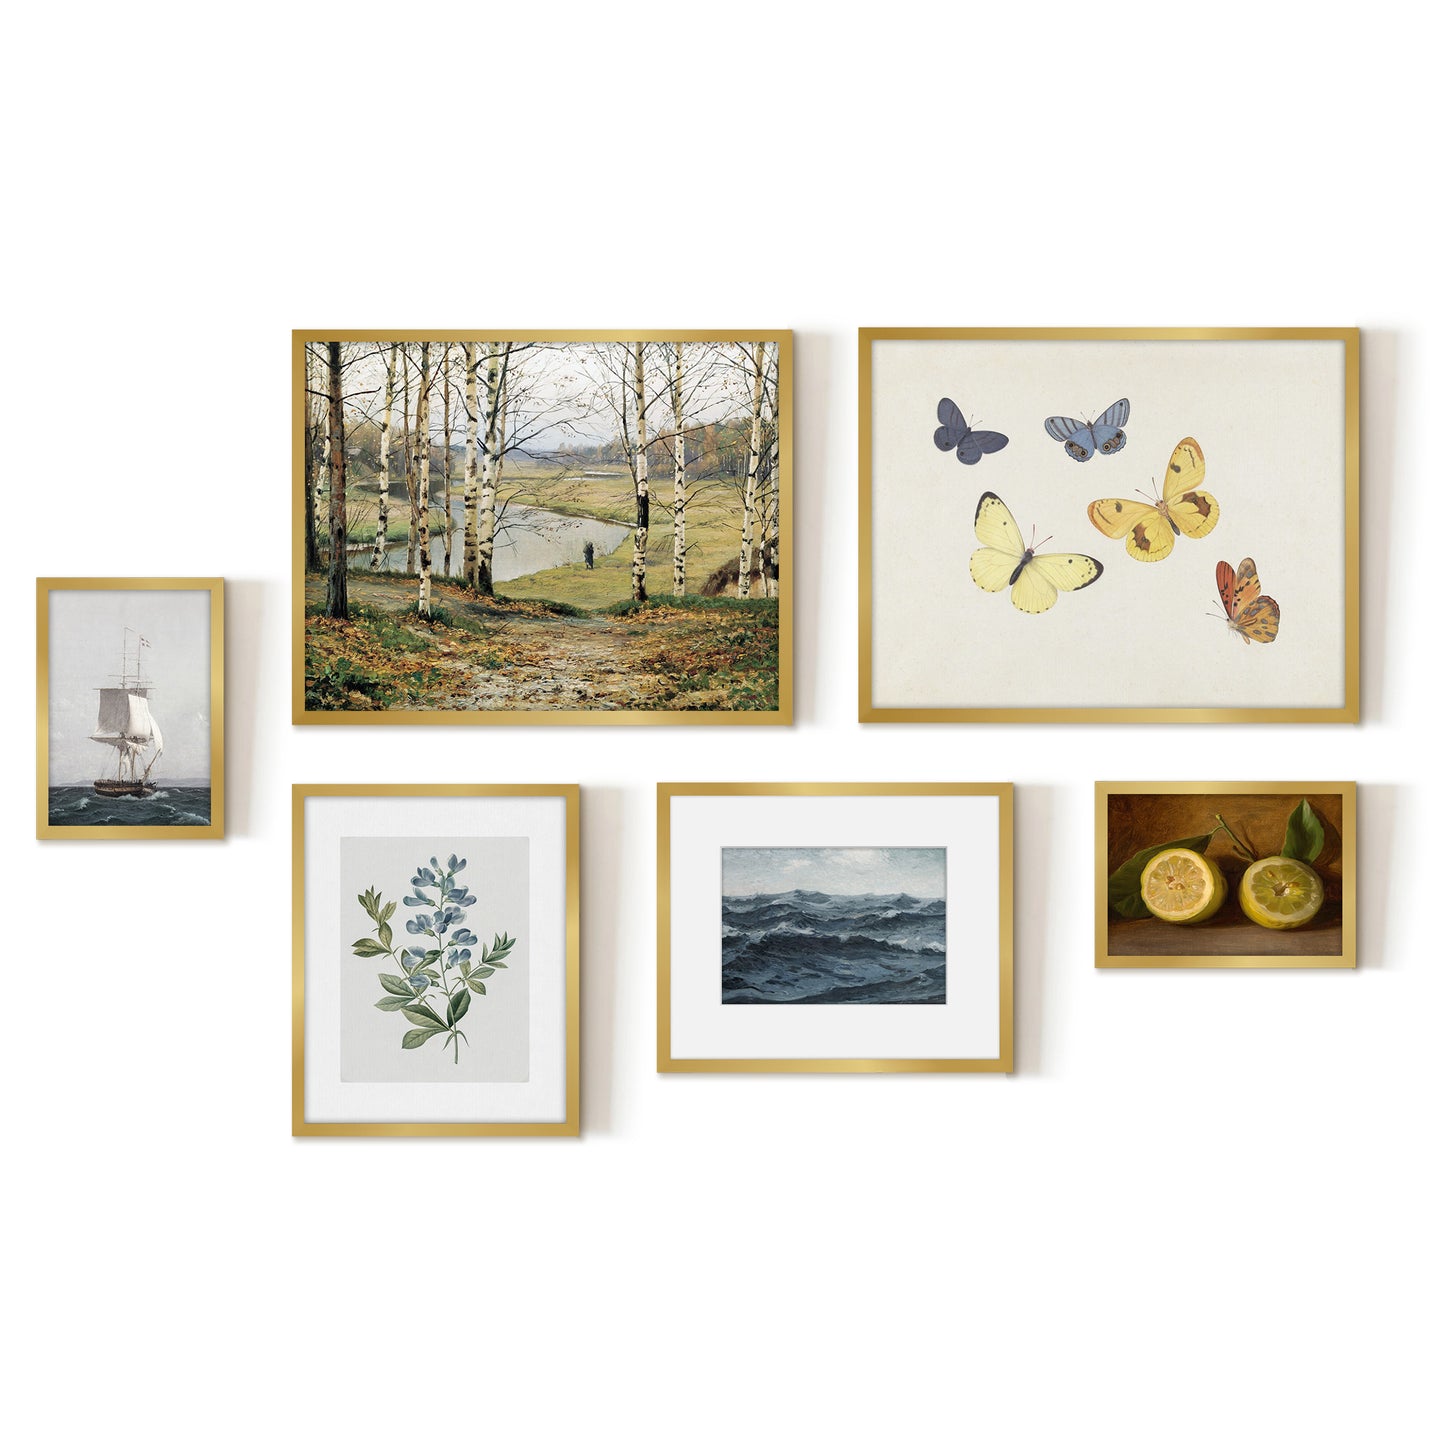 6 Piece Vintage Gallery Wall Art Set - Whimsical Nature's Palette Art by Maple + Oak